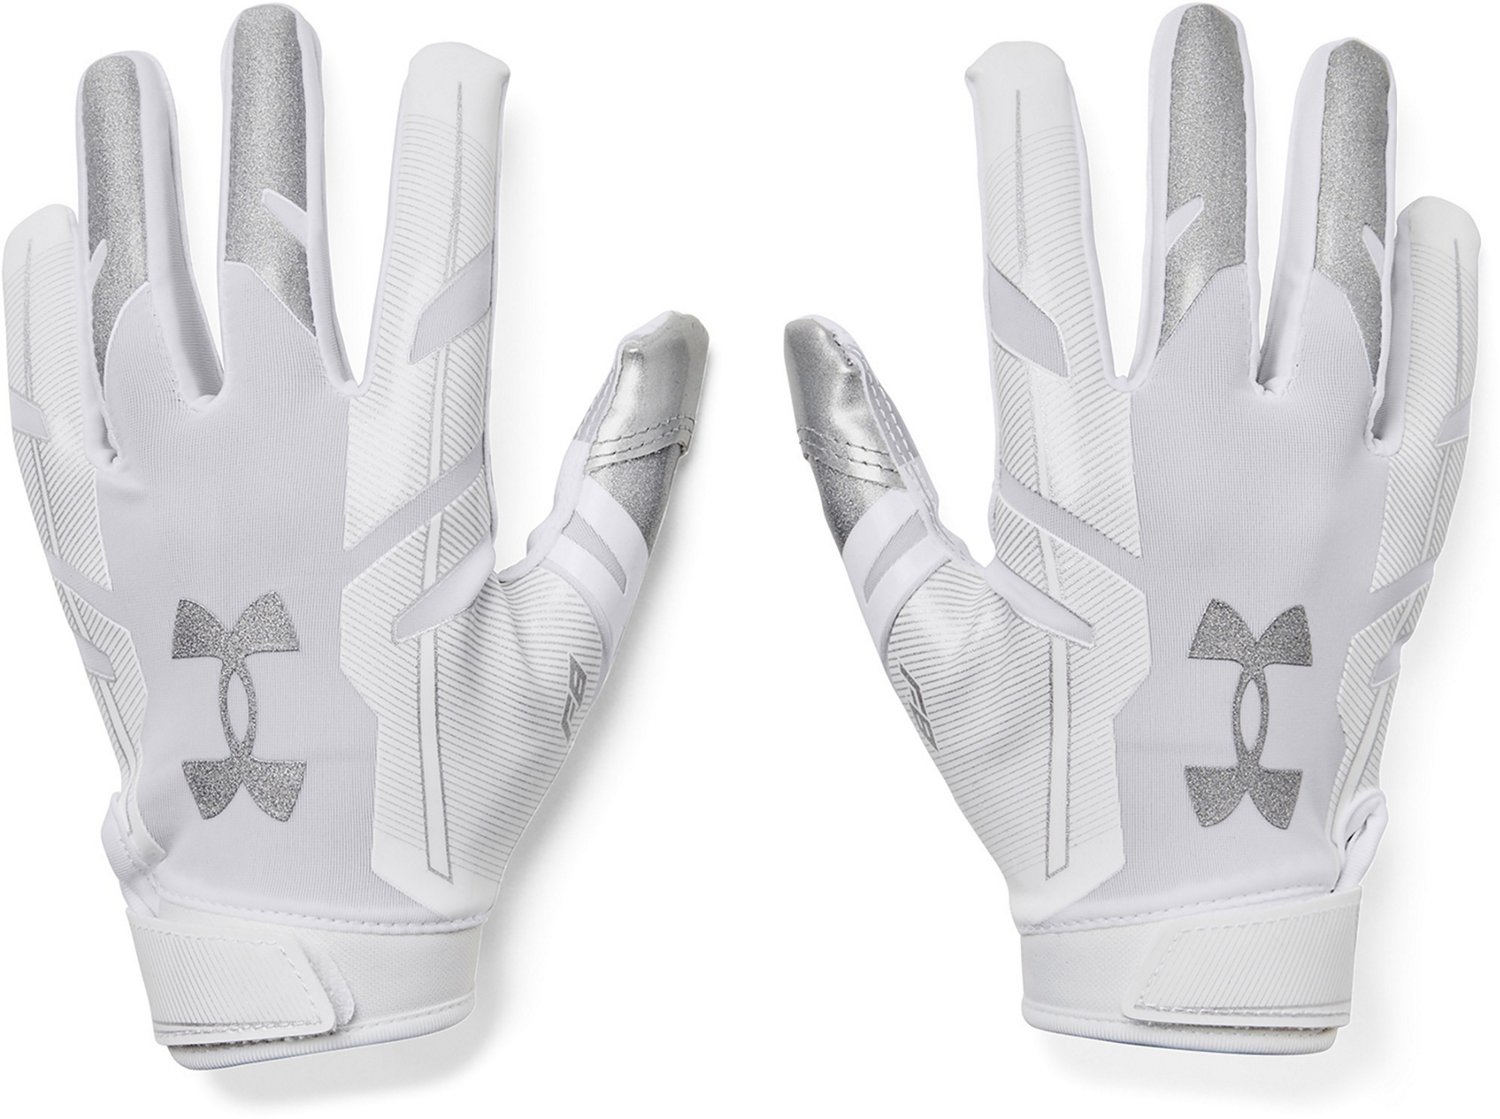 Under Armour Youth F8 Football Gloves